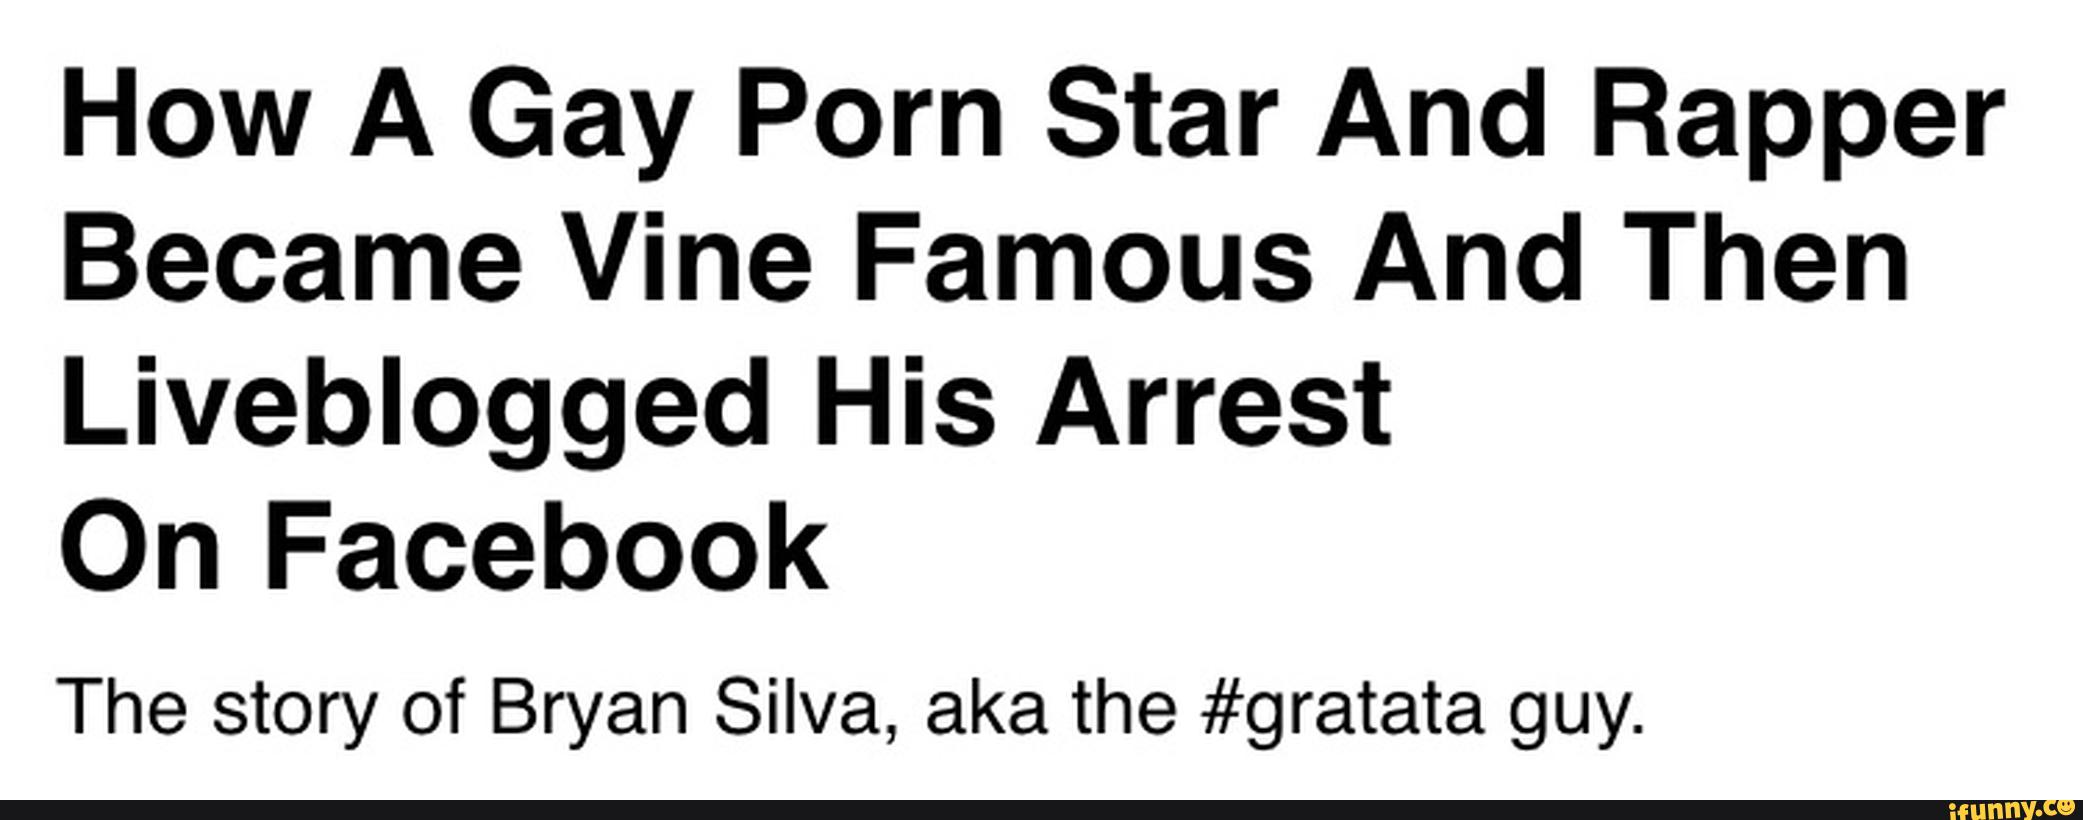 Gay Porn Star And Rapper Became Vine Famous And Then Liveblogged His Arrest...